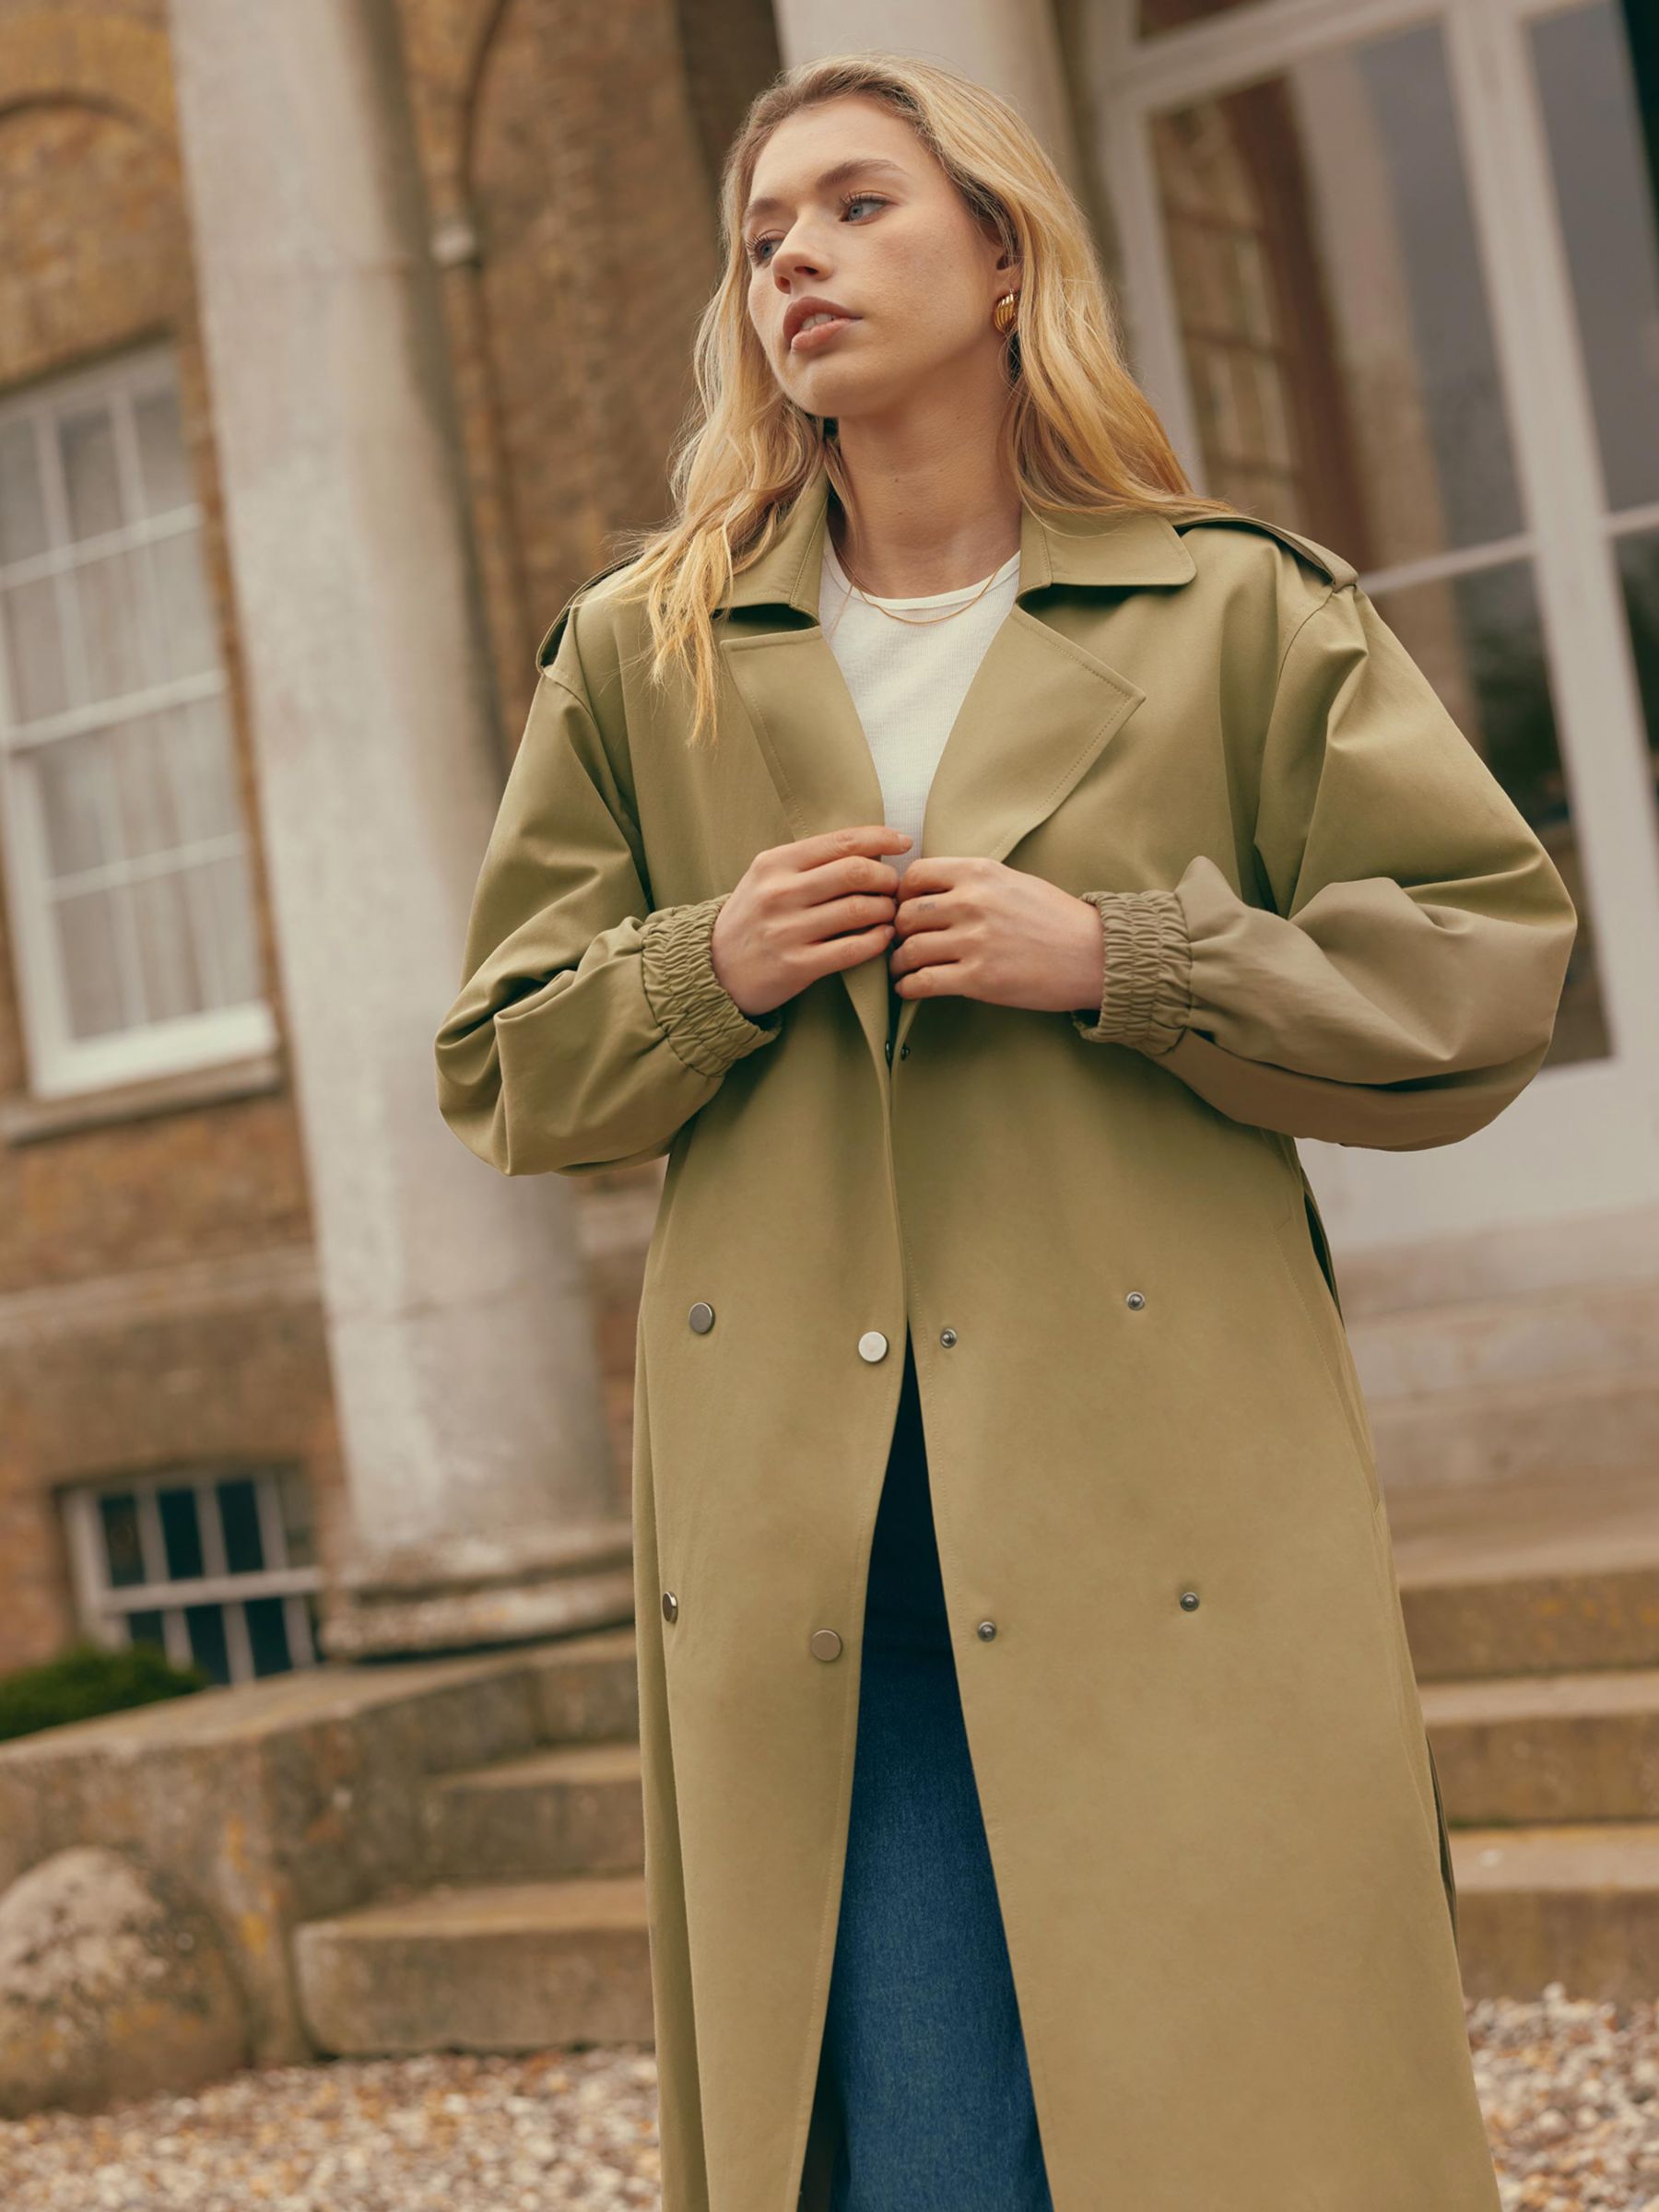 Buy Ro&Zo Olive Belted Trench Coat, Green Online at johnlewis.com